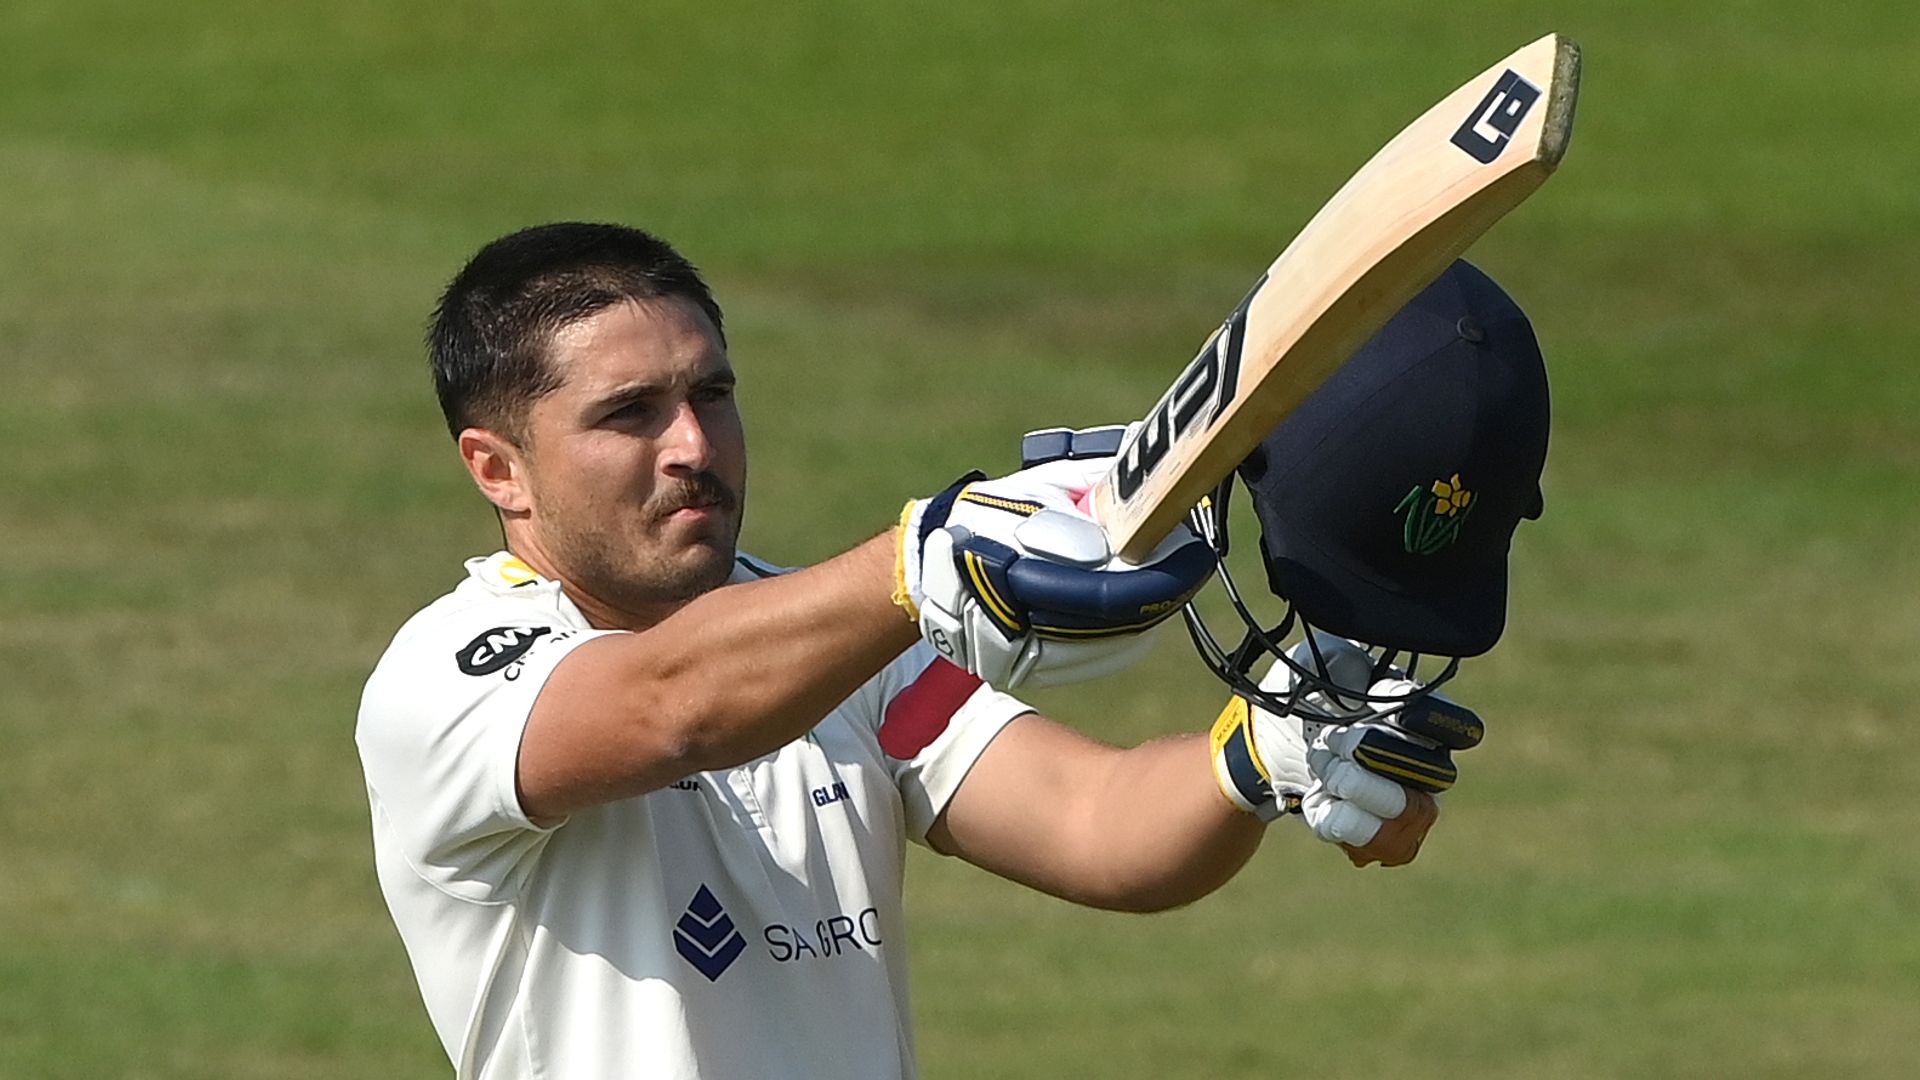 County Championship round-up: Cook scores 74th ton